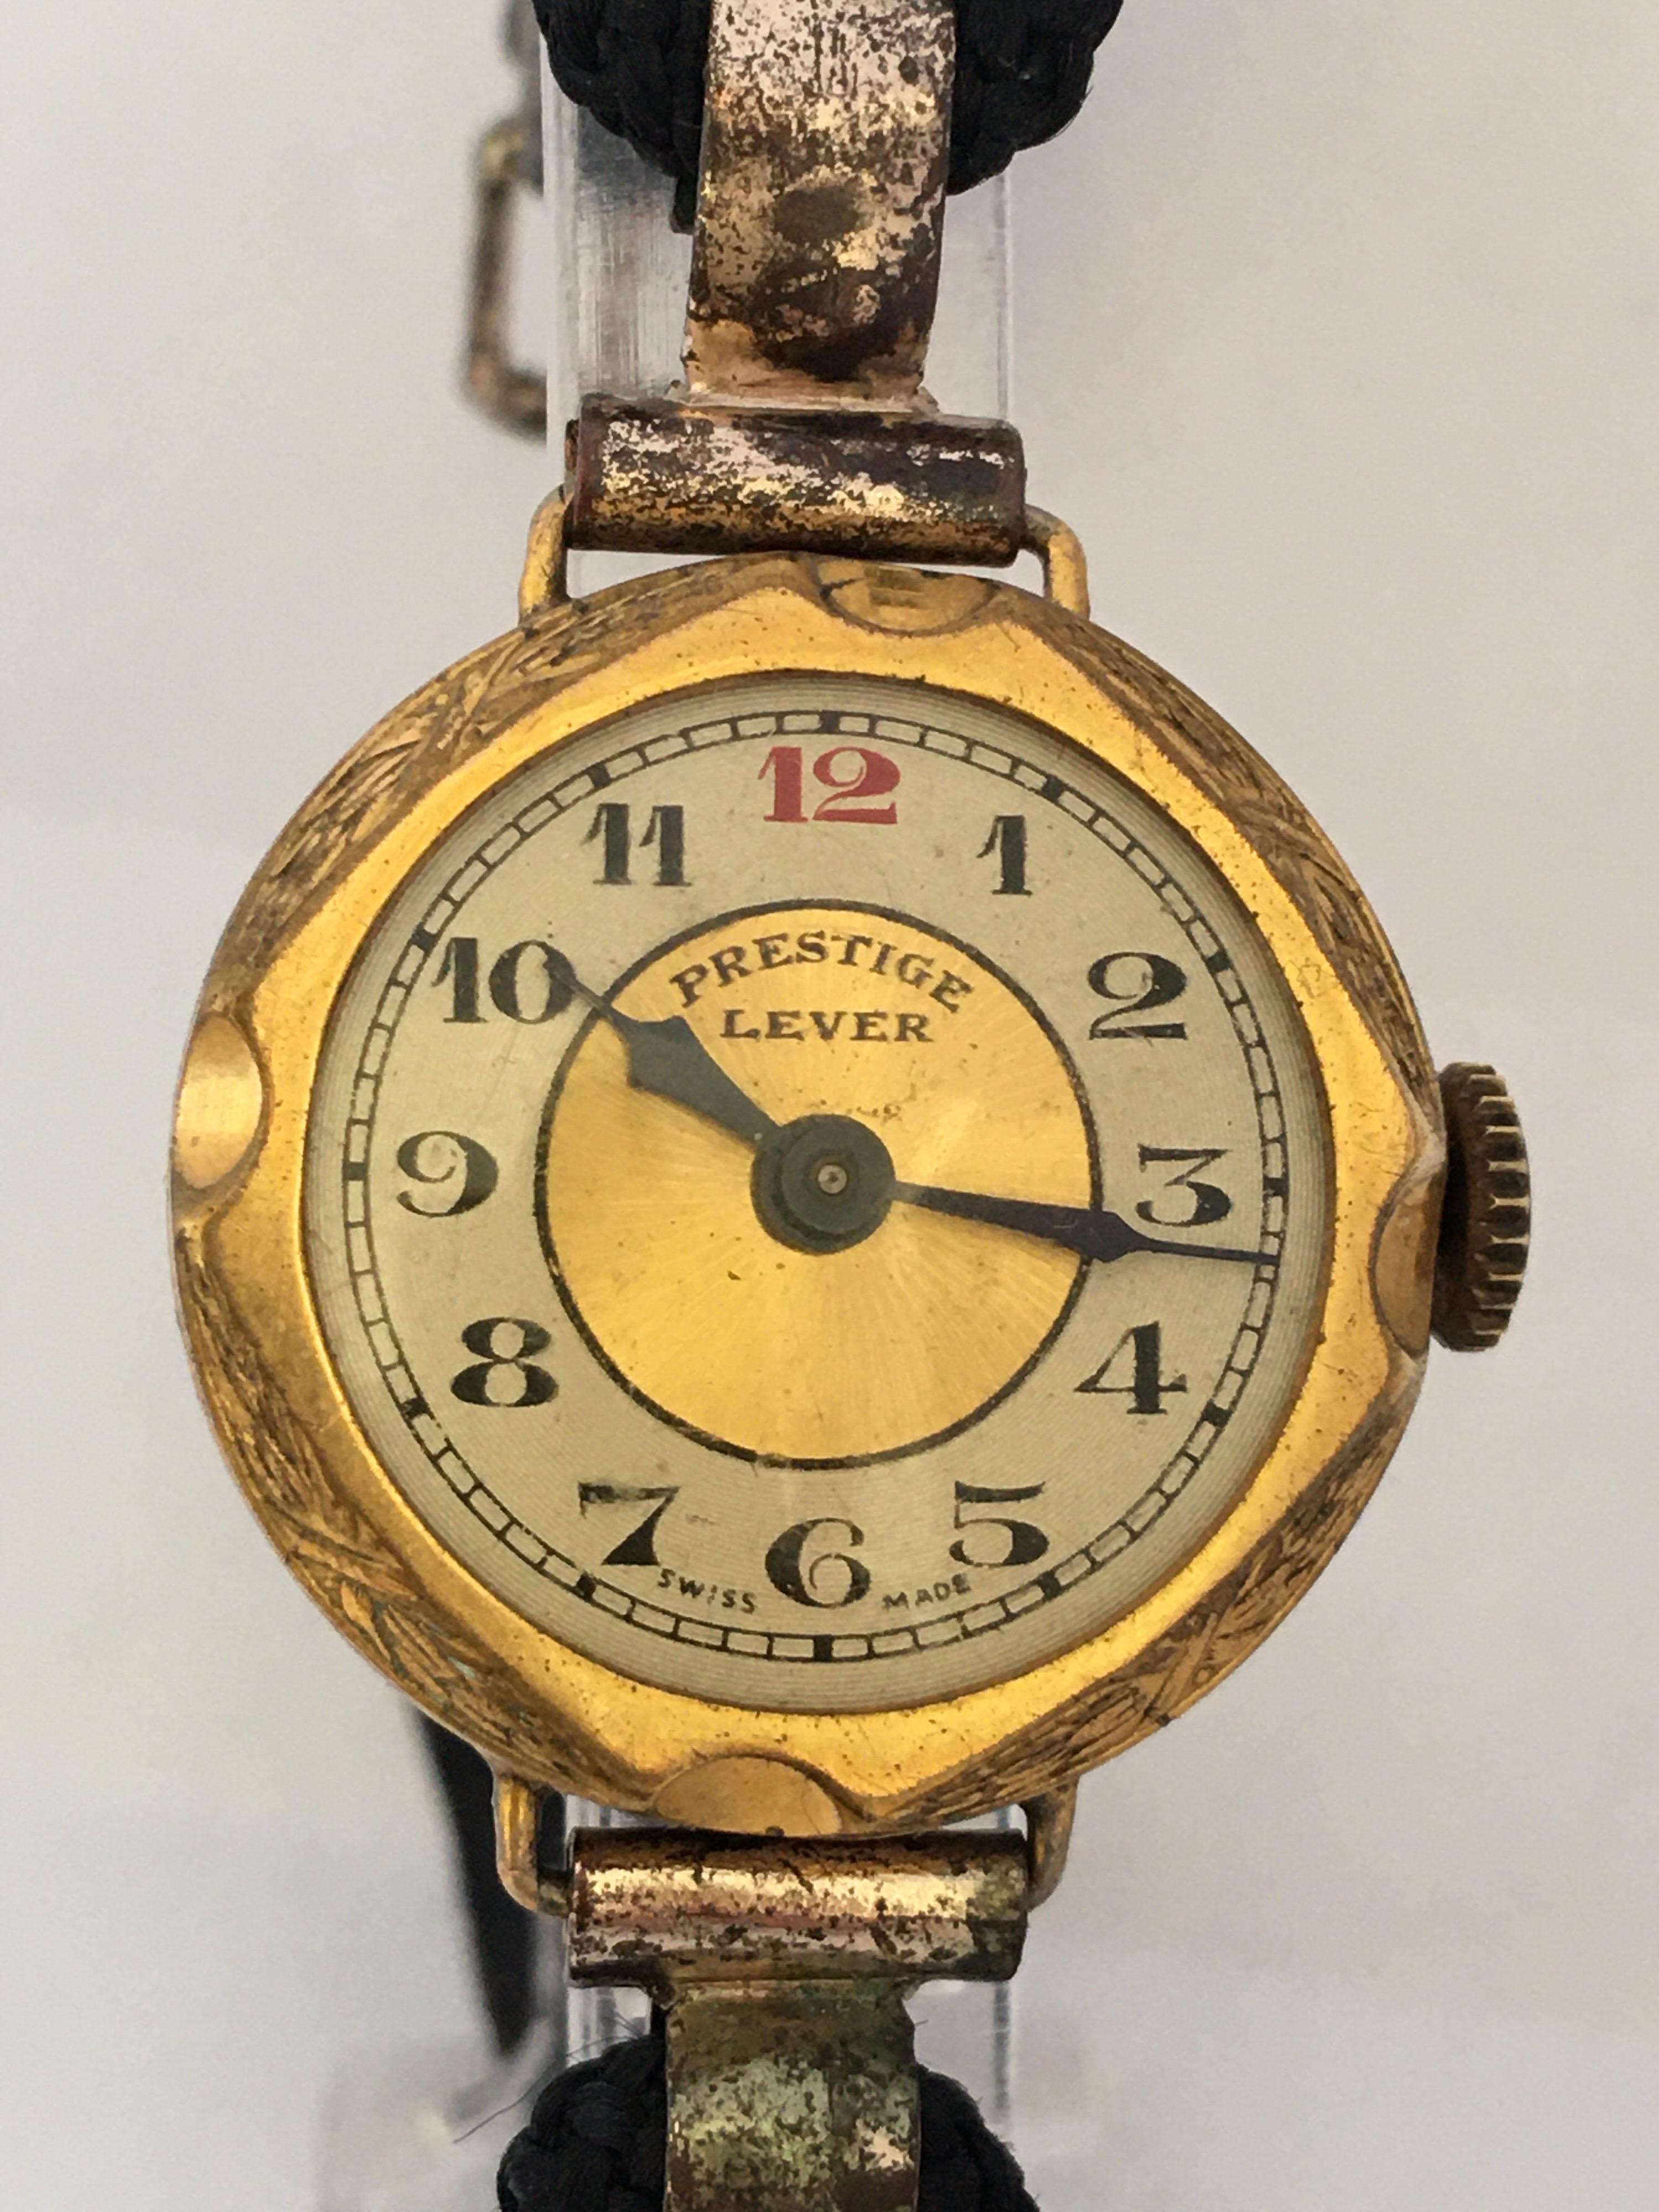 This beautiful vintage hand winding ladies Trench watch is working and it is ticking well. Visible signs of wearing and has some aged with some deterioration on the gold plated watch case as shown. The strap buckle has tarnished.

Please study the